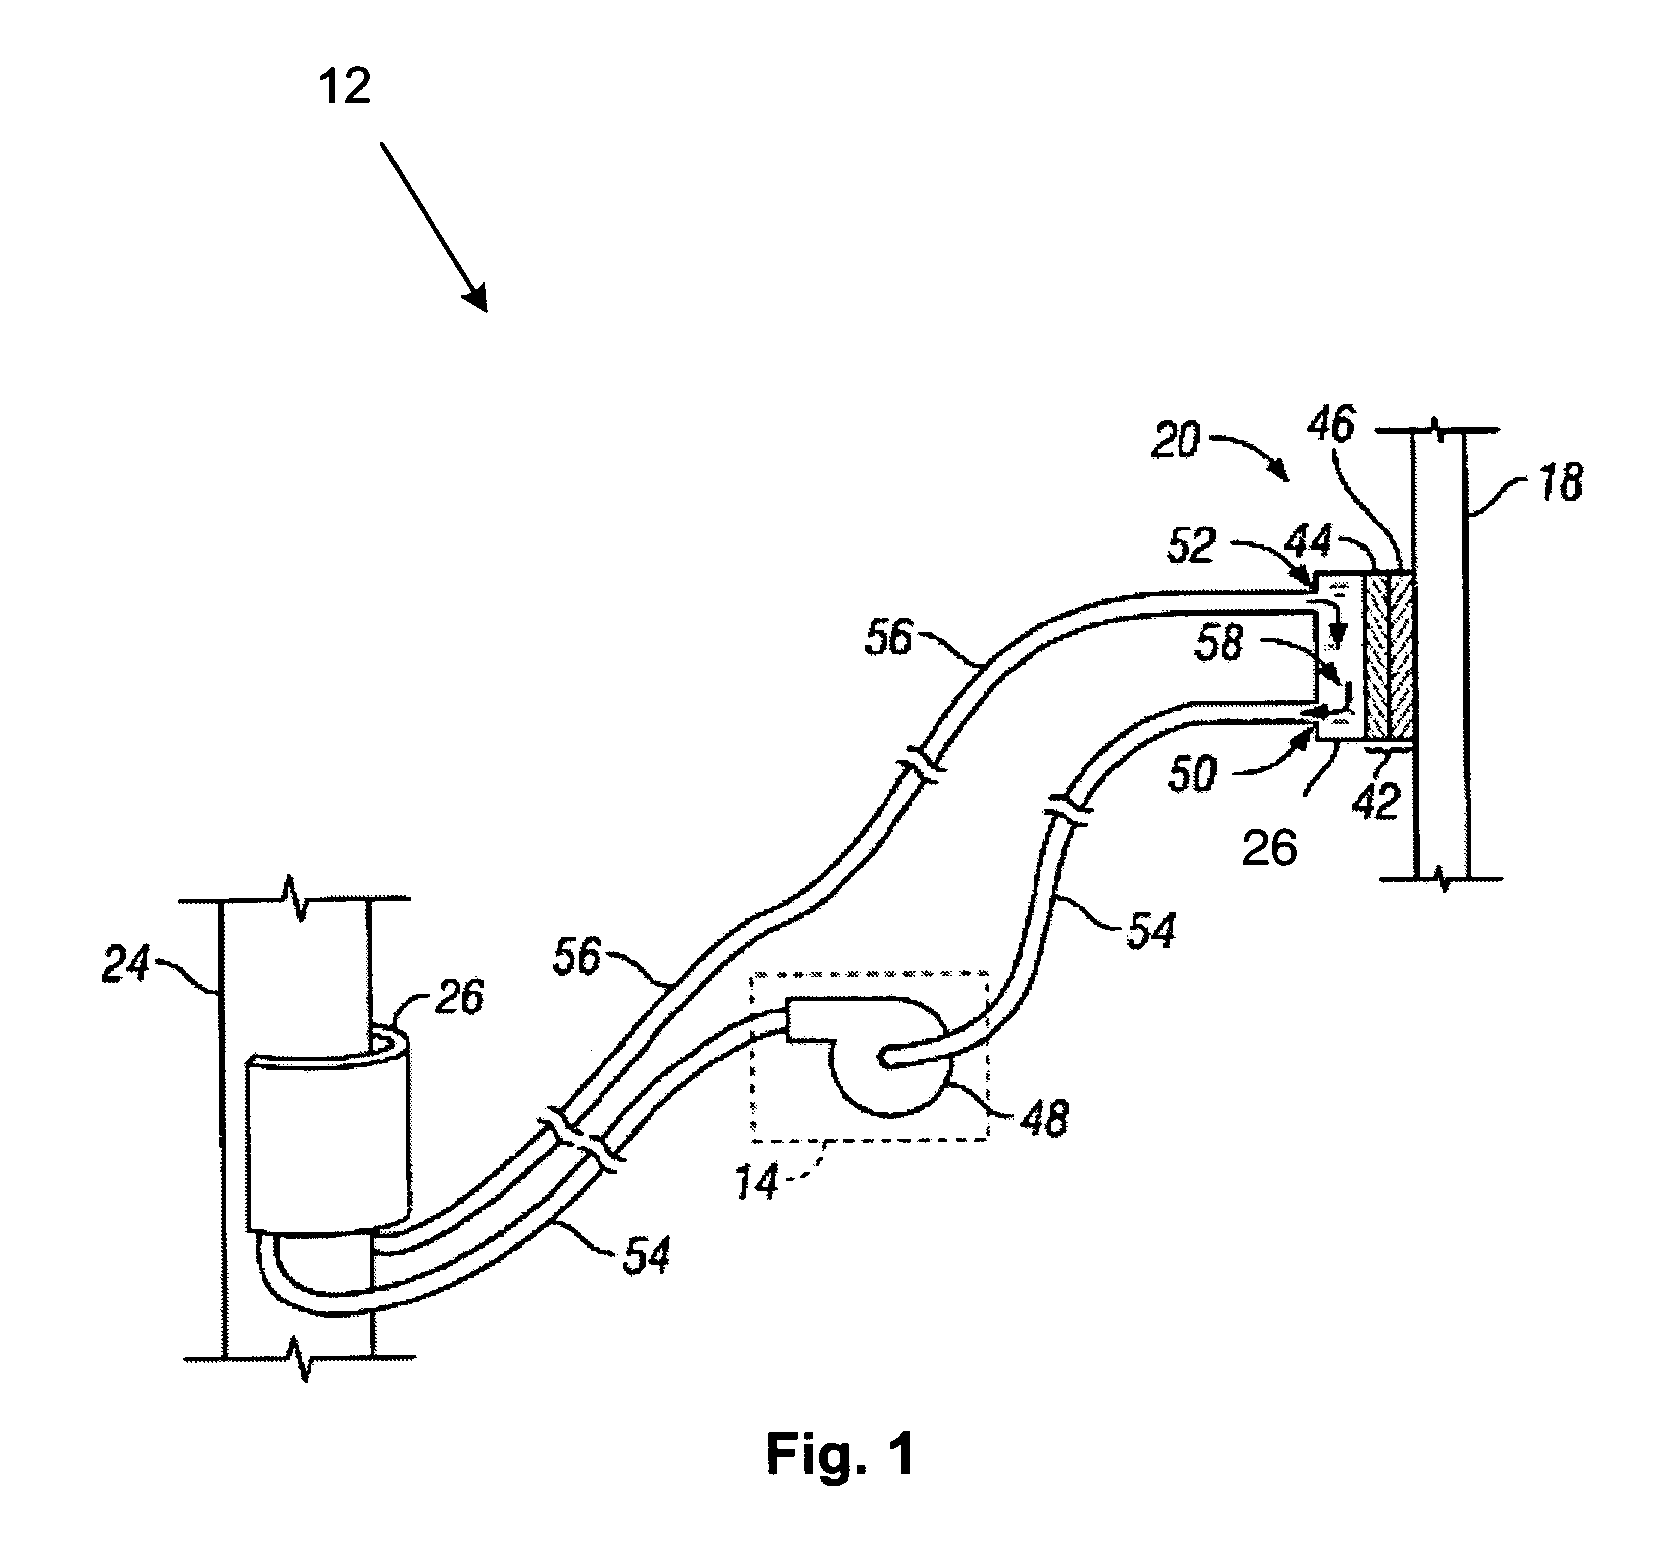 Apparatus and methods for altering temperature in a region within the body